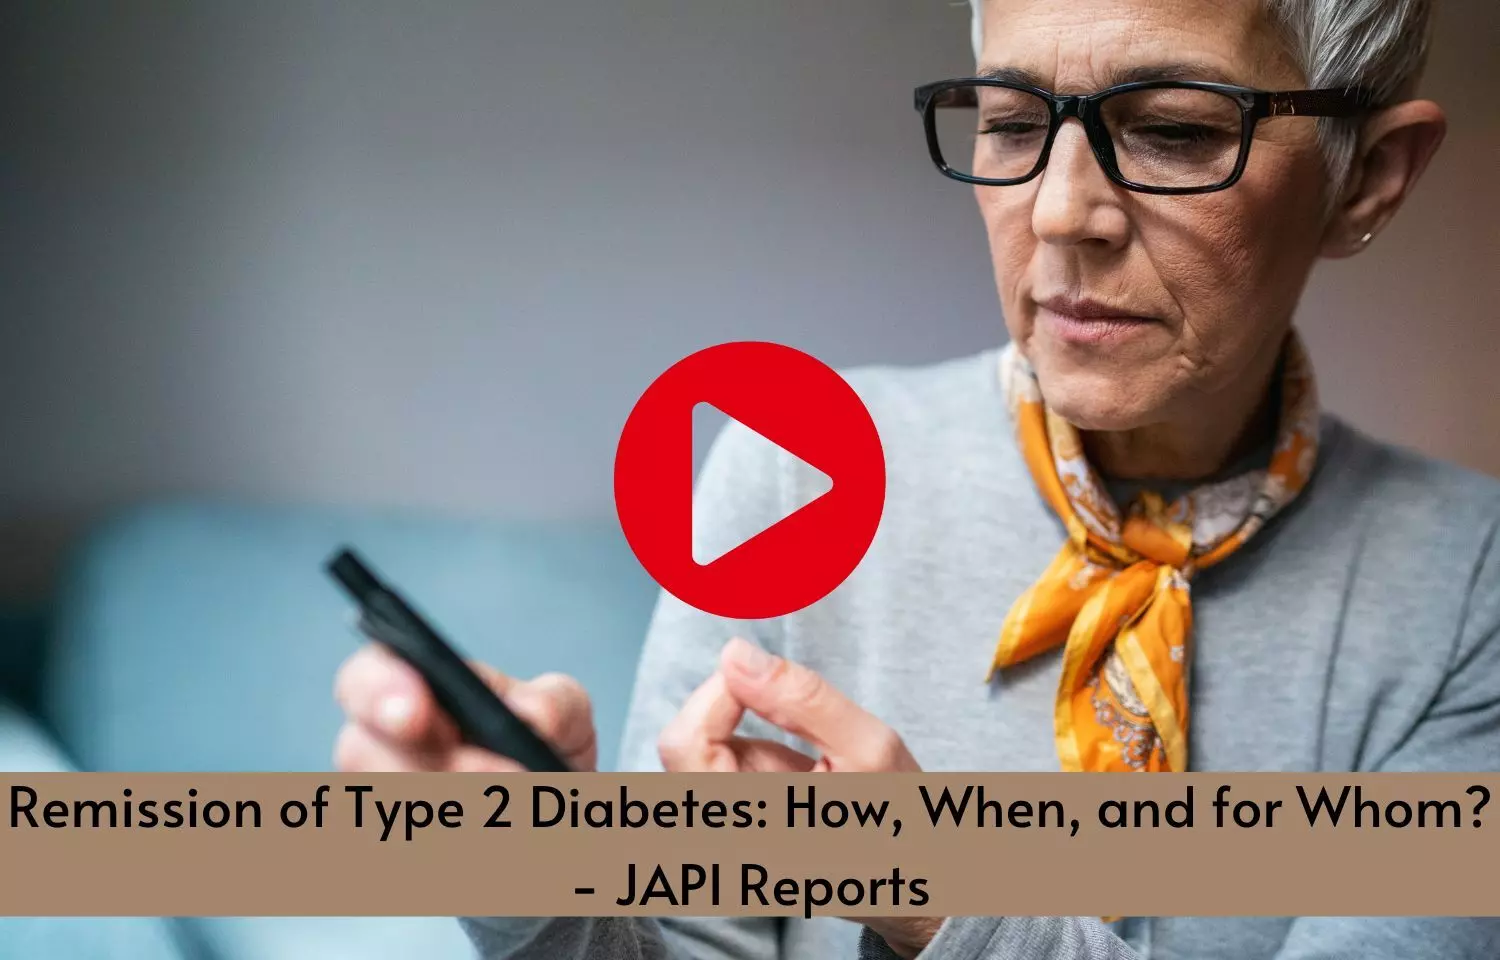 Remission of Type 2 Diabetes: How, When and for Whom? - JAPI Reports